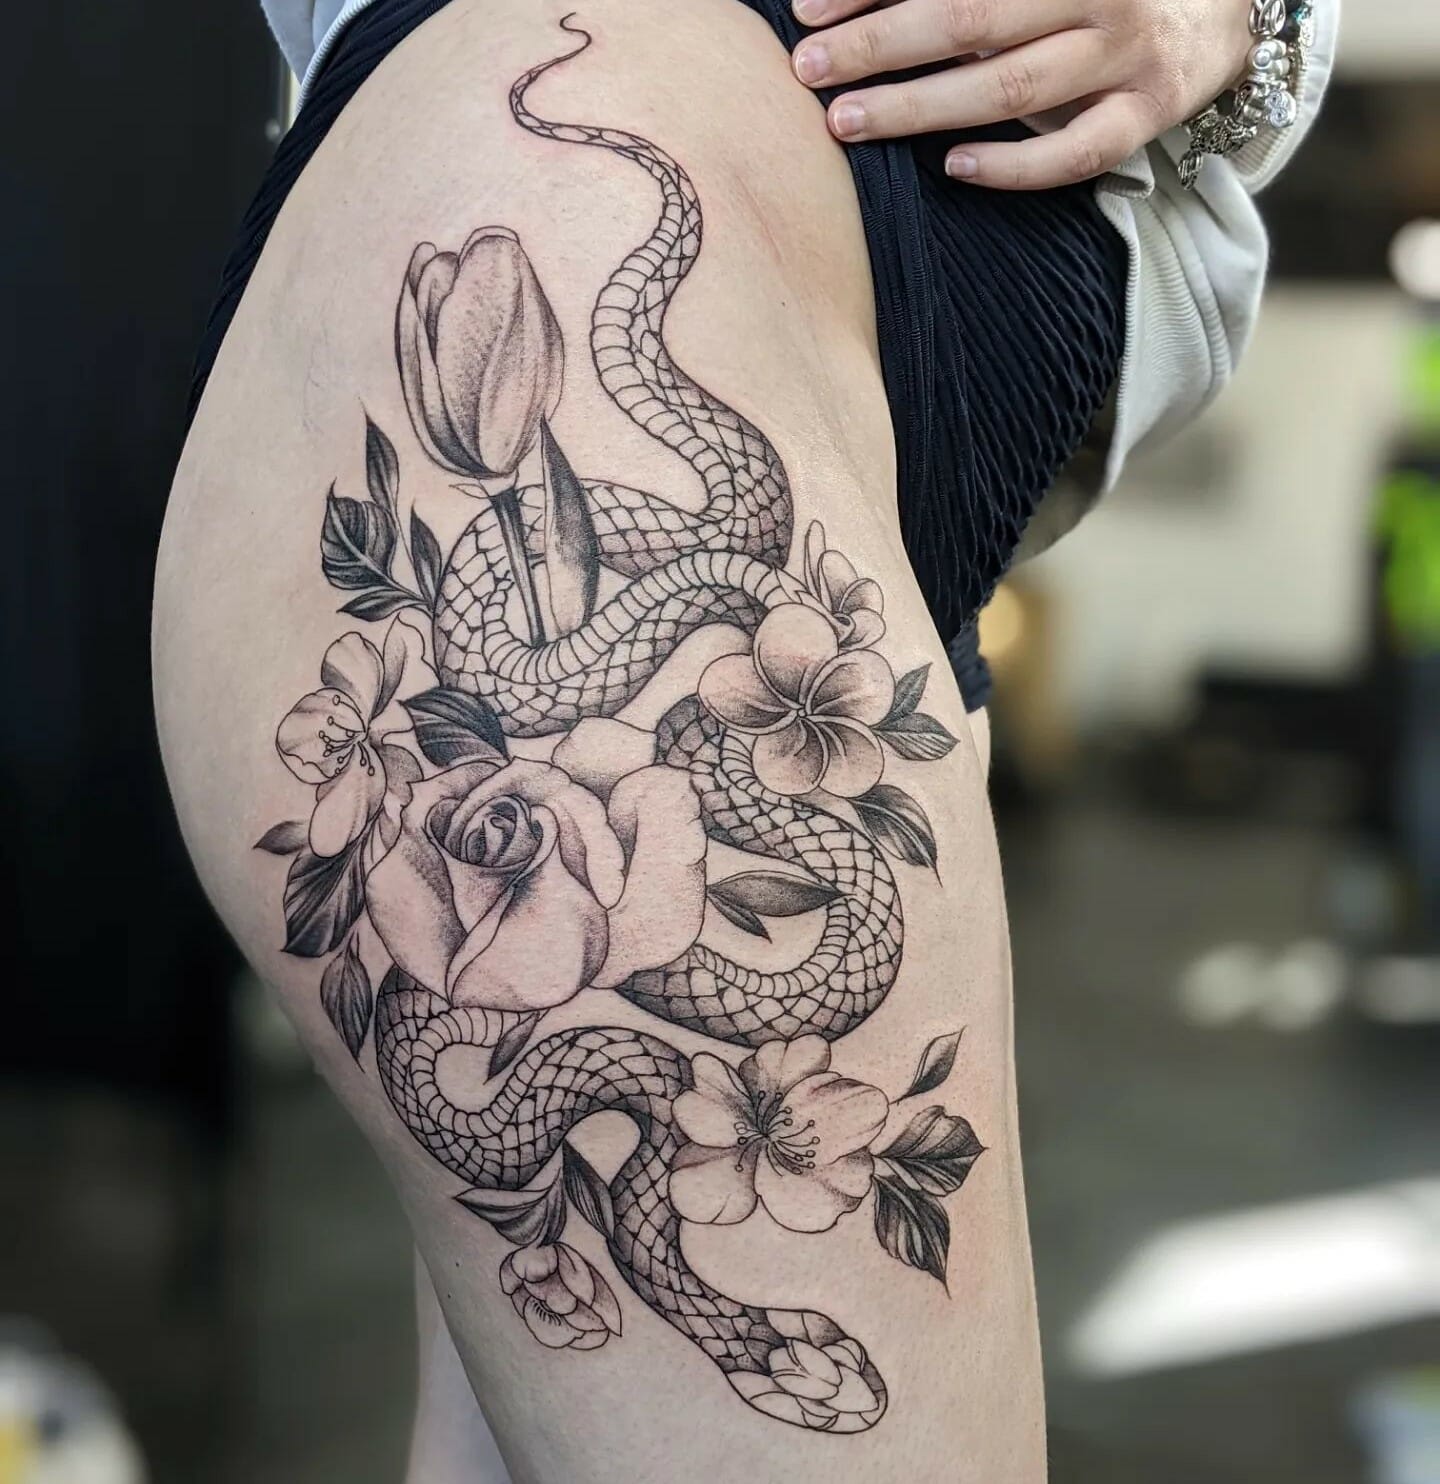 101 Best Snake Thigh Tattoo Ideas That Will Blow Your Mind! - Outsons